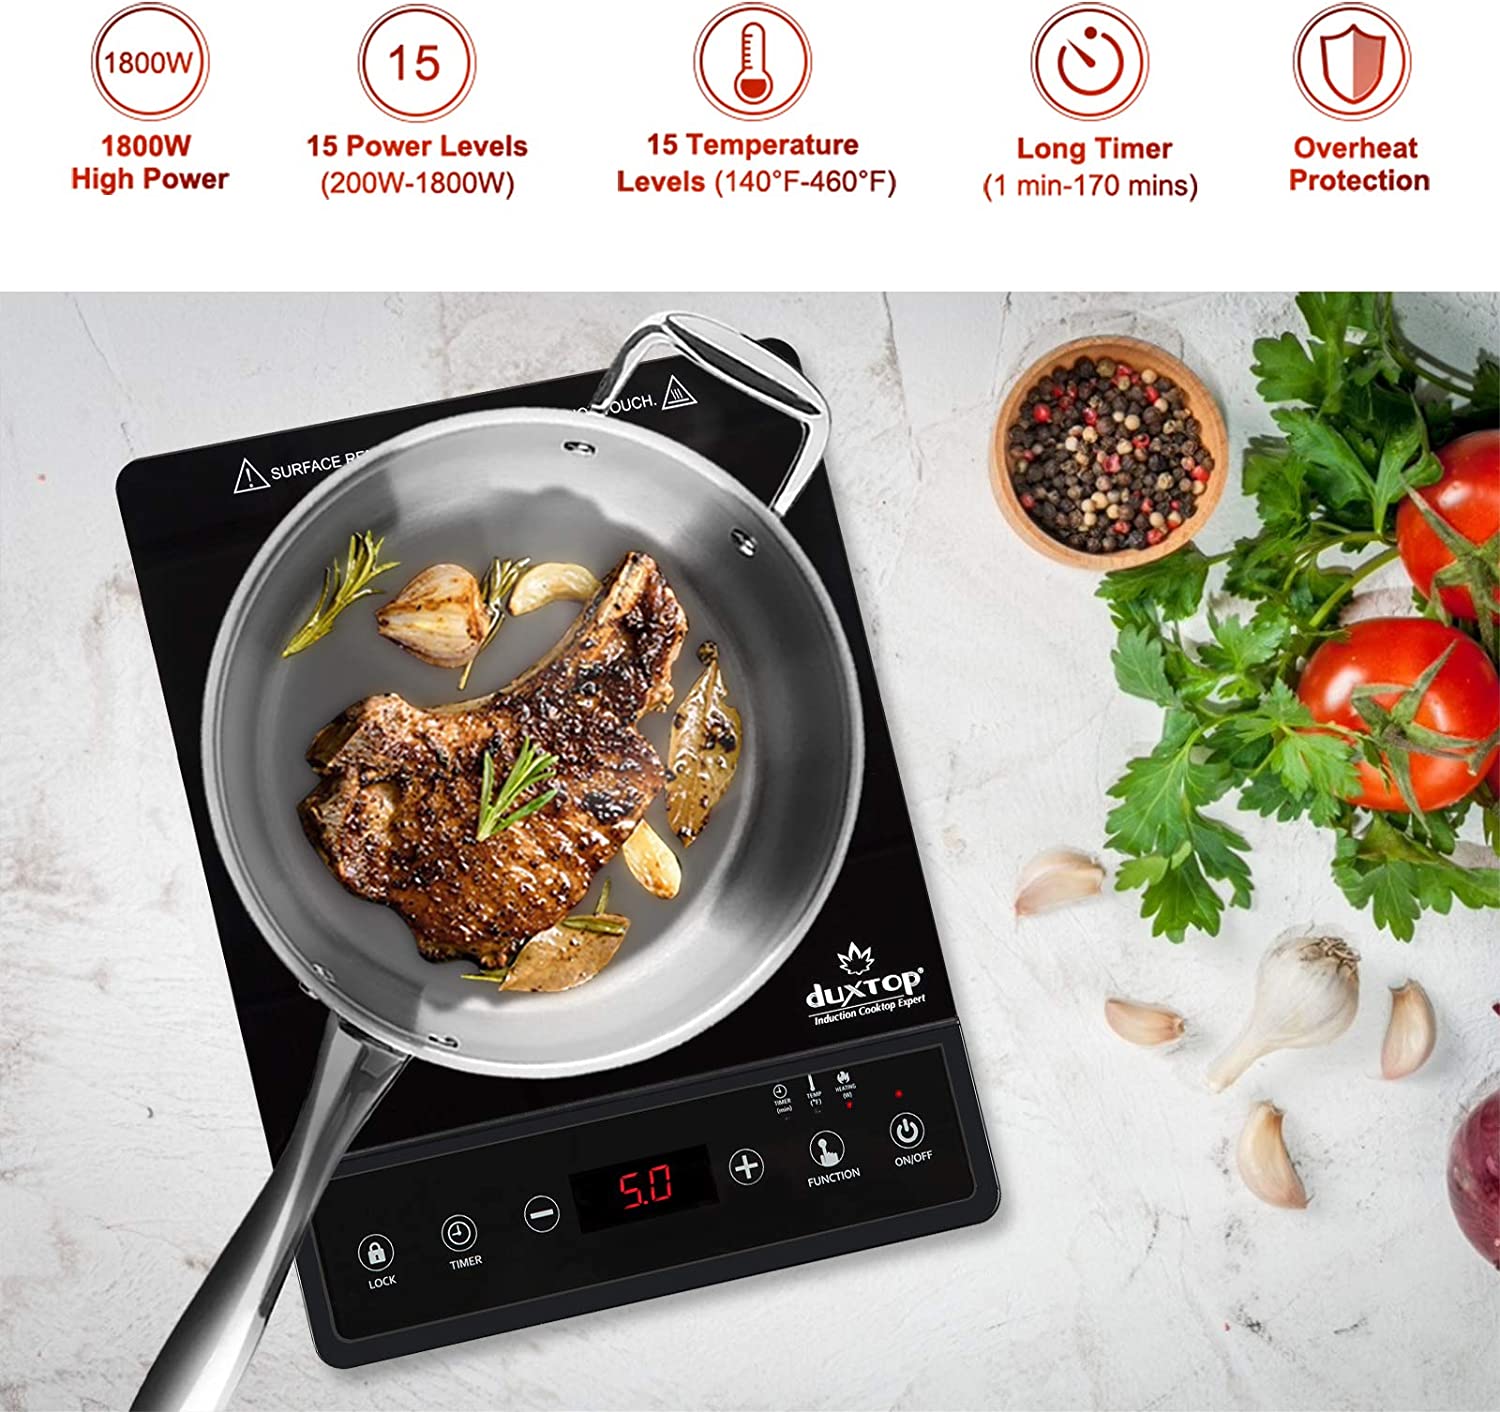 https://discounttoday.net/wp-content/uploads/2022/10/Duxtop-Portable-Induction-Cooktop-Countertop-Burner-Induction-Burner-with-Timer-and-Sensor-Touch-1800W-8500ST-E210C21.jpg